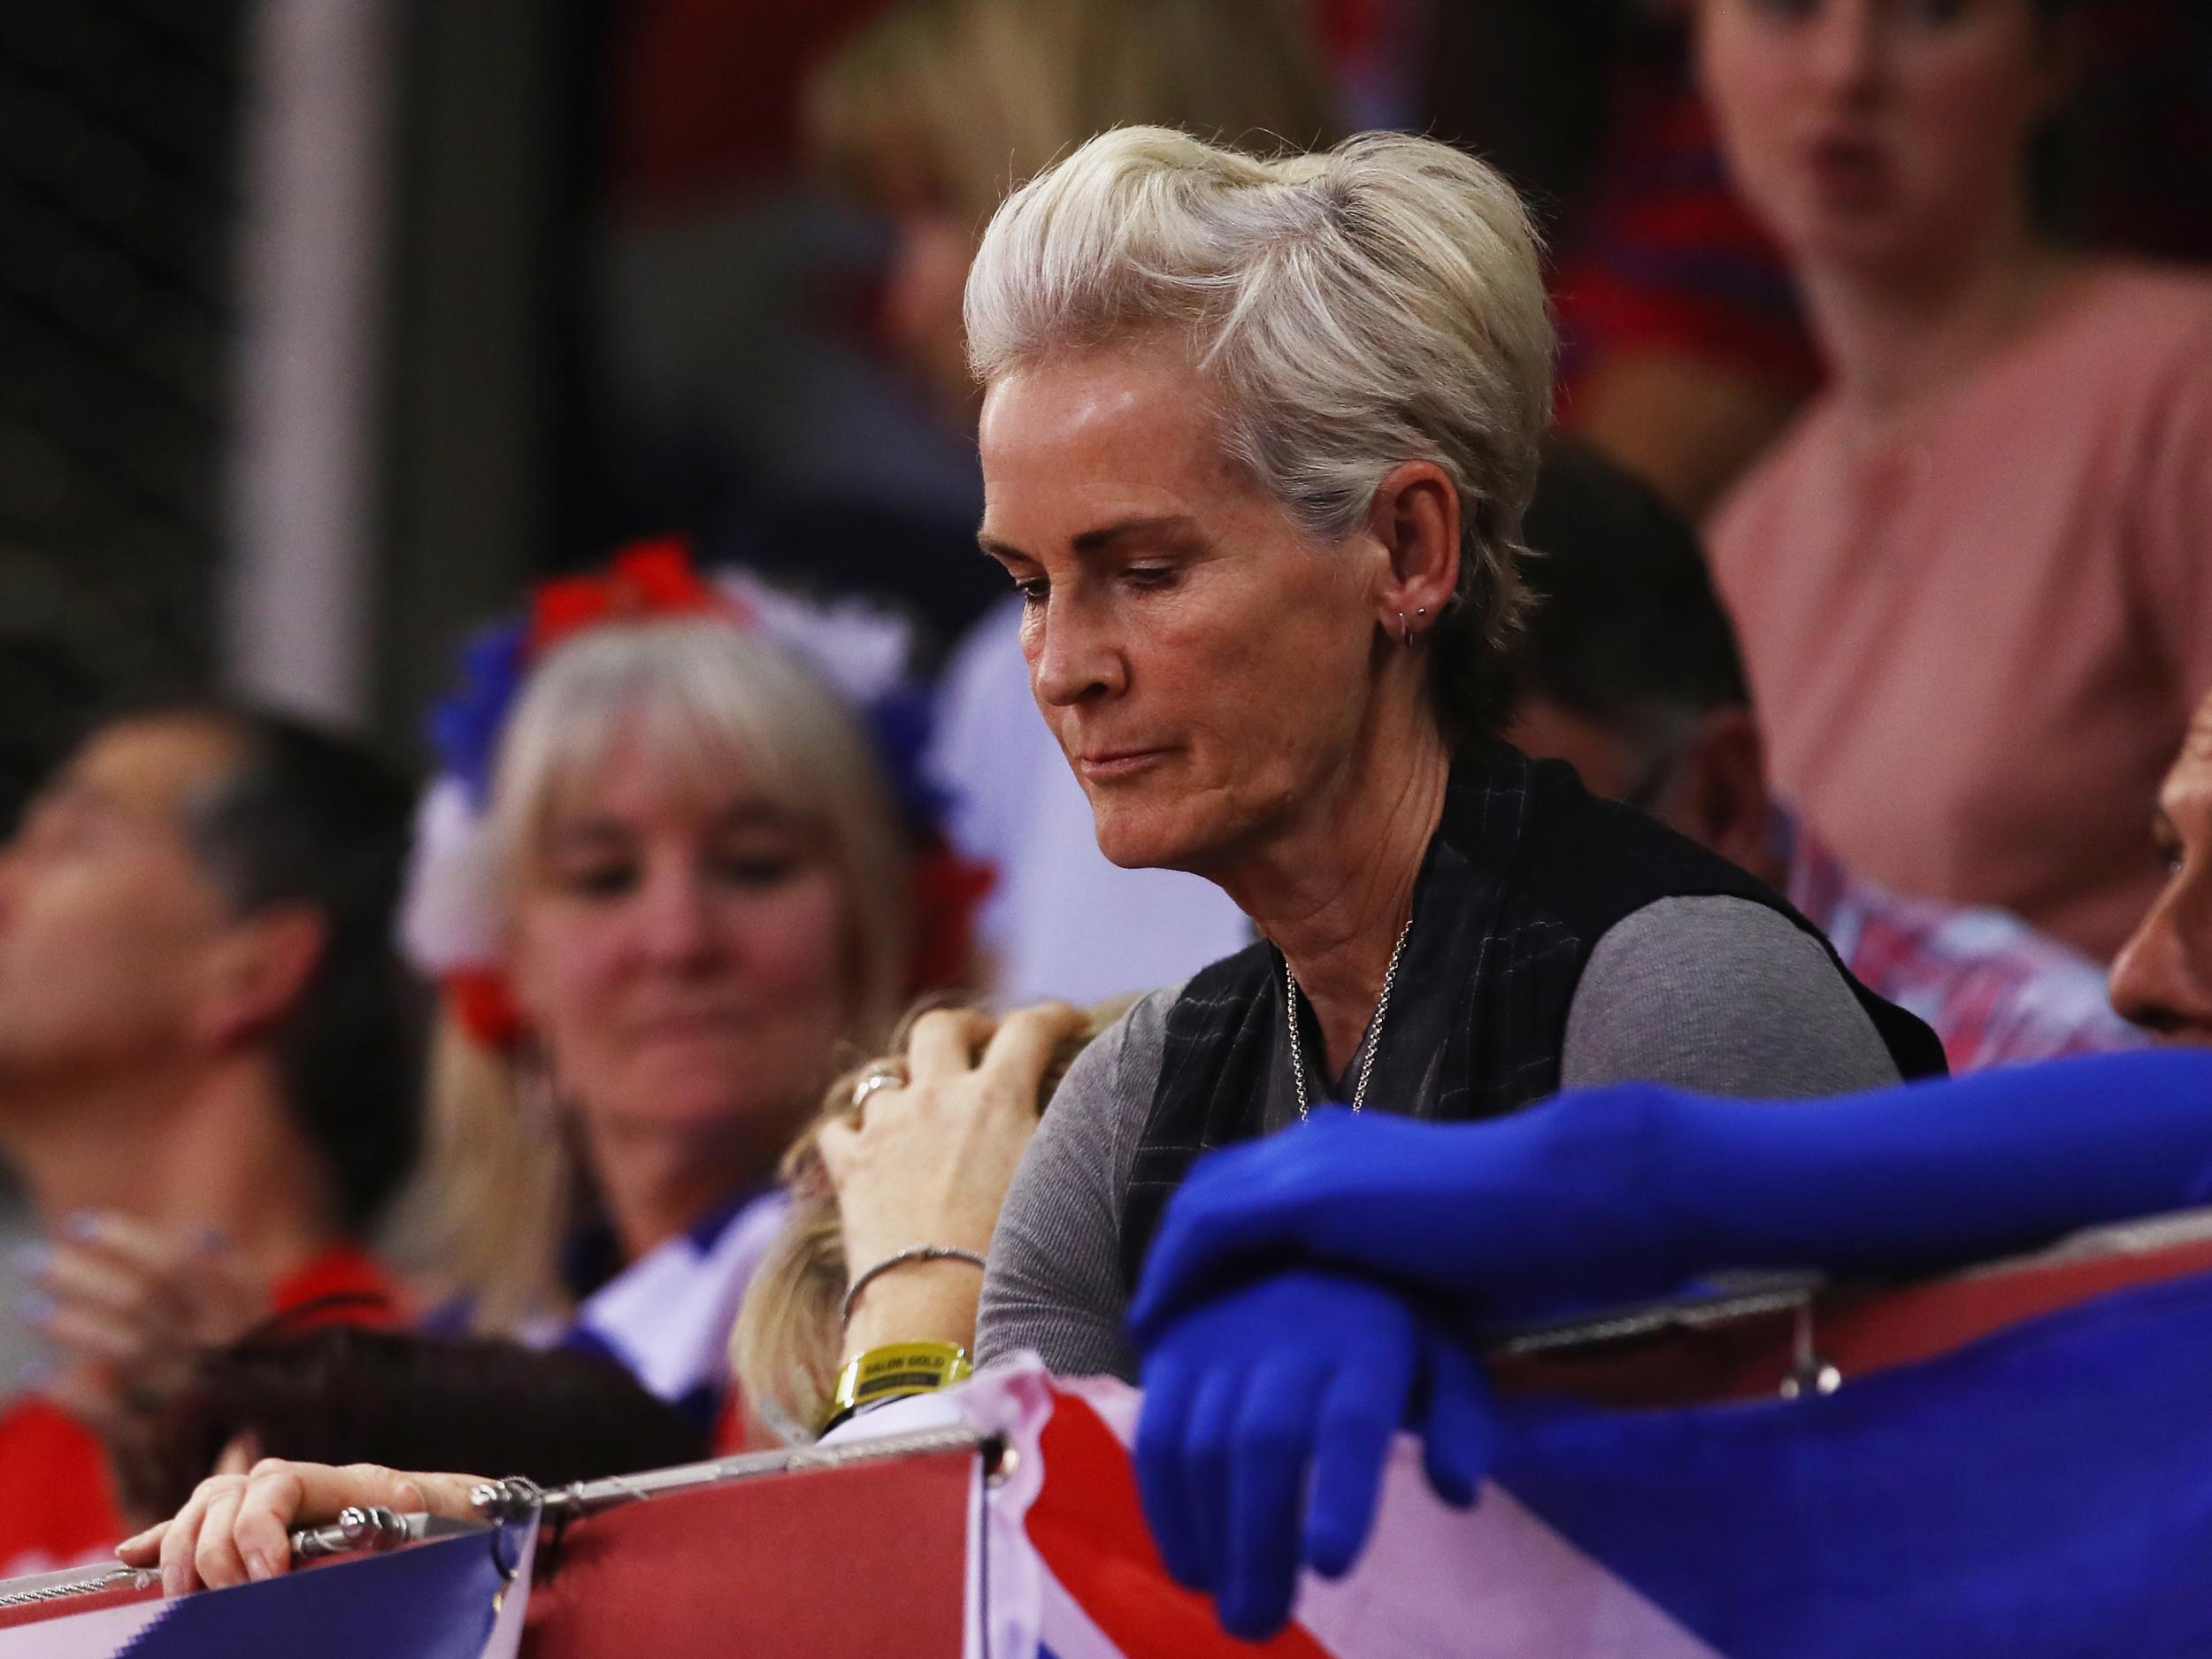 Judy Murray highlighted player-coach relationships as an area of potential concern